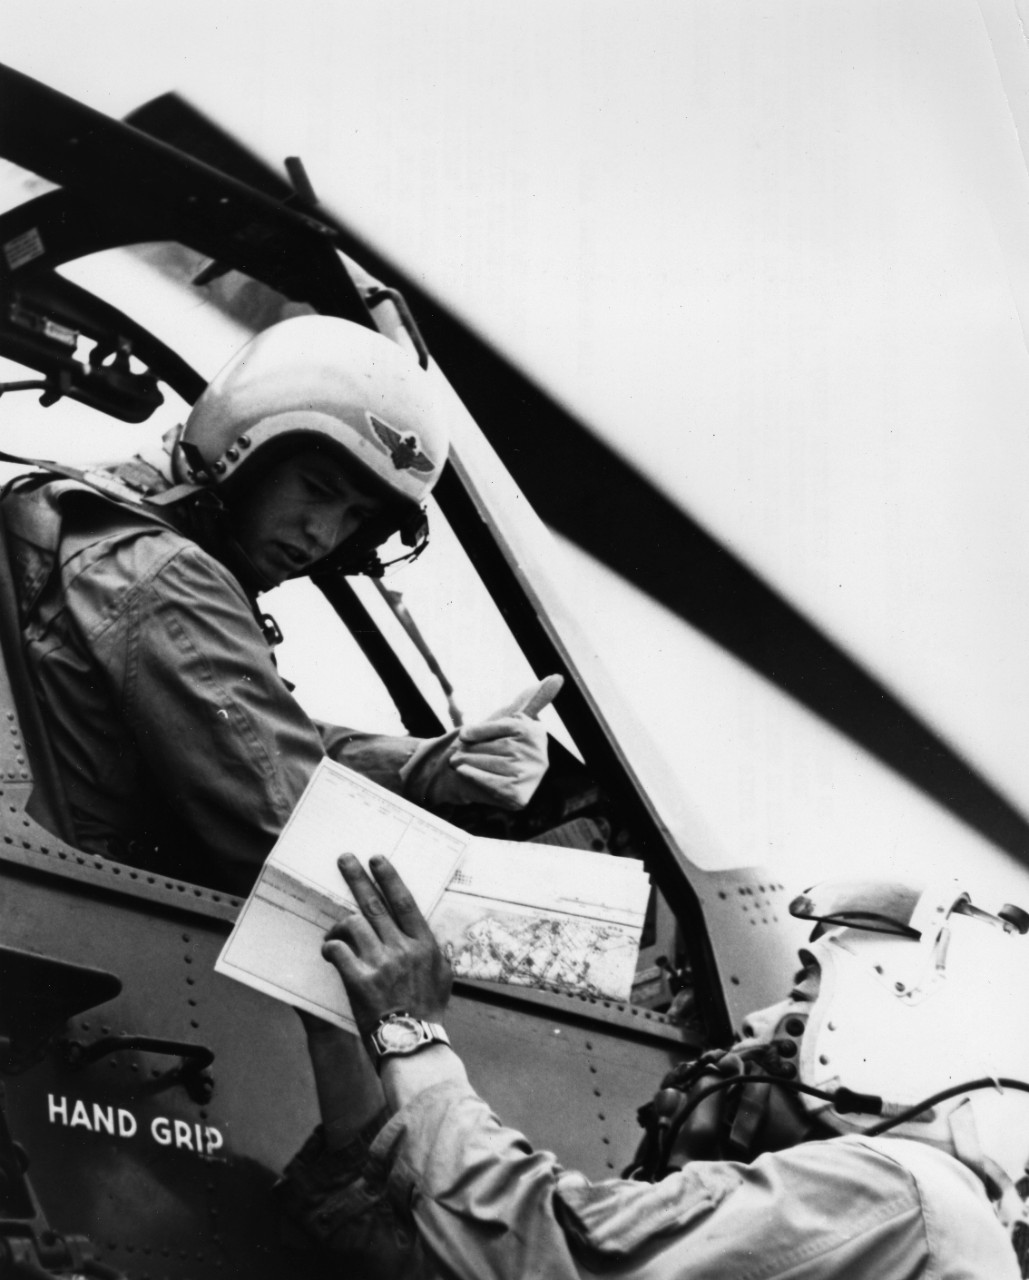 Lieutenant Junior Grade Joseph Greer, pilot of a U.S. Navy helicopter from the aircraft carrier USS Kearsarge (CV-33), receives briefing information from a Japanese pilot. Helicopters were used to carry food, clothing, medical supplies, and other necessities to victims isolated by floods from Typhoon Vera.</p>